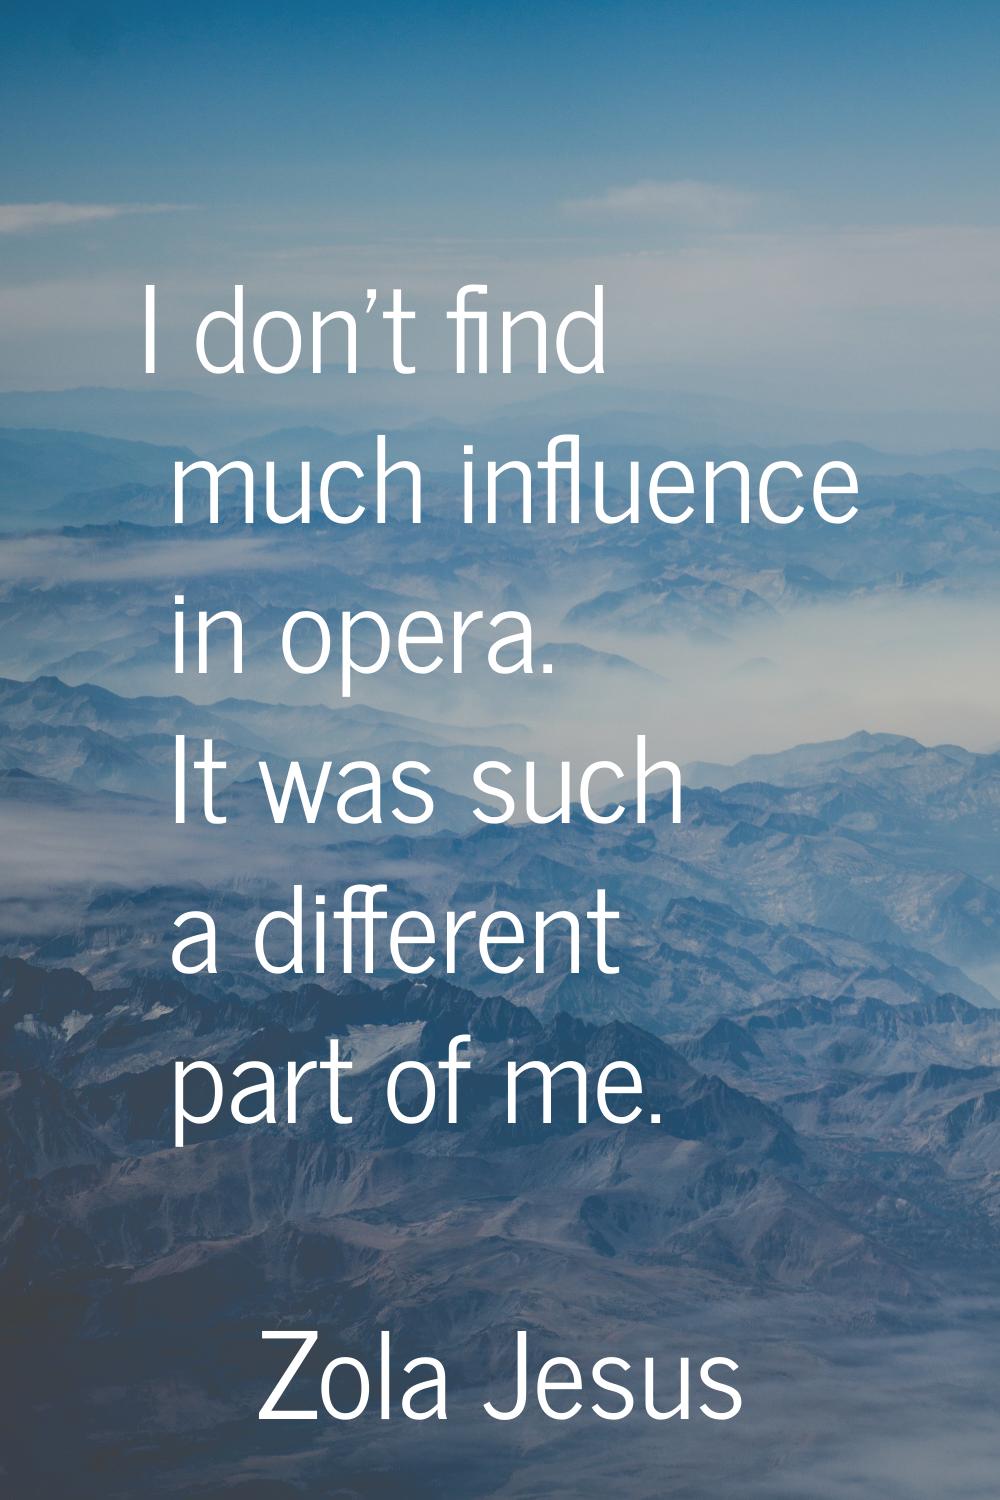 I don't find much influence in opera. It was such a different part of me.